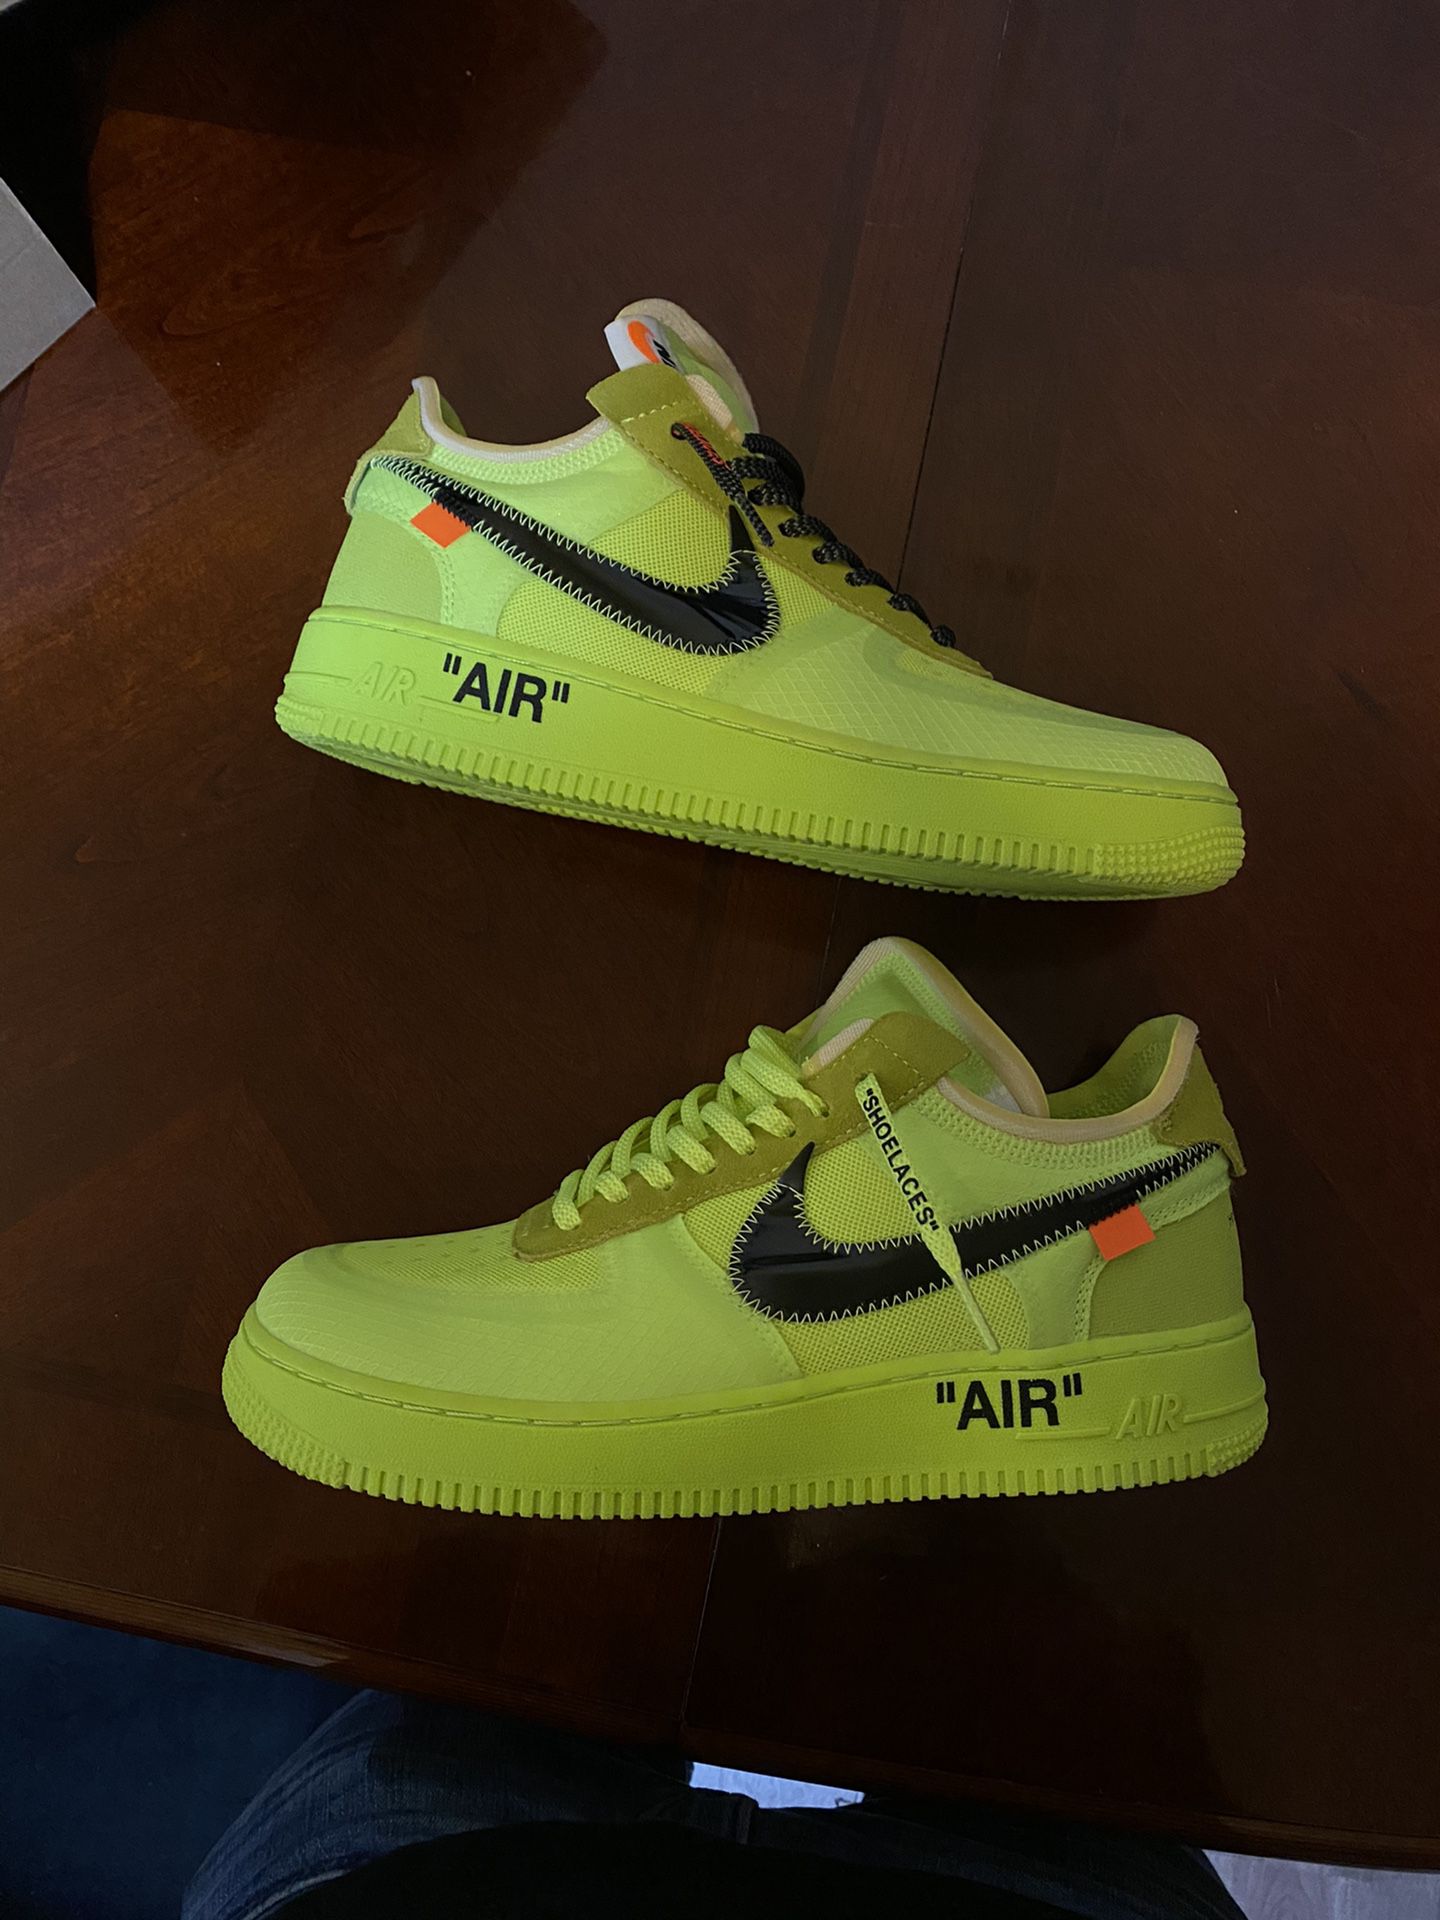 500$ OBO size 8.5 off white volt Nike Air Force 1